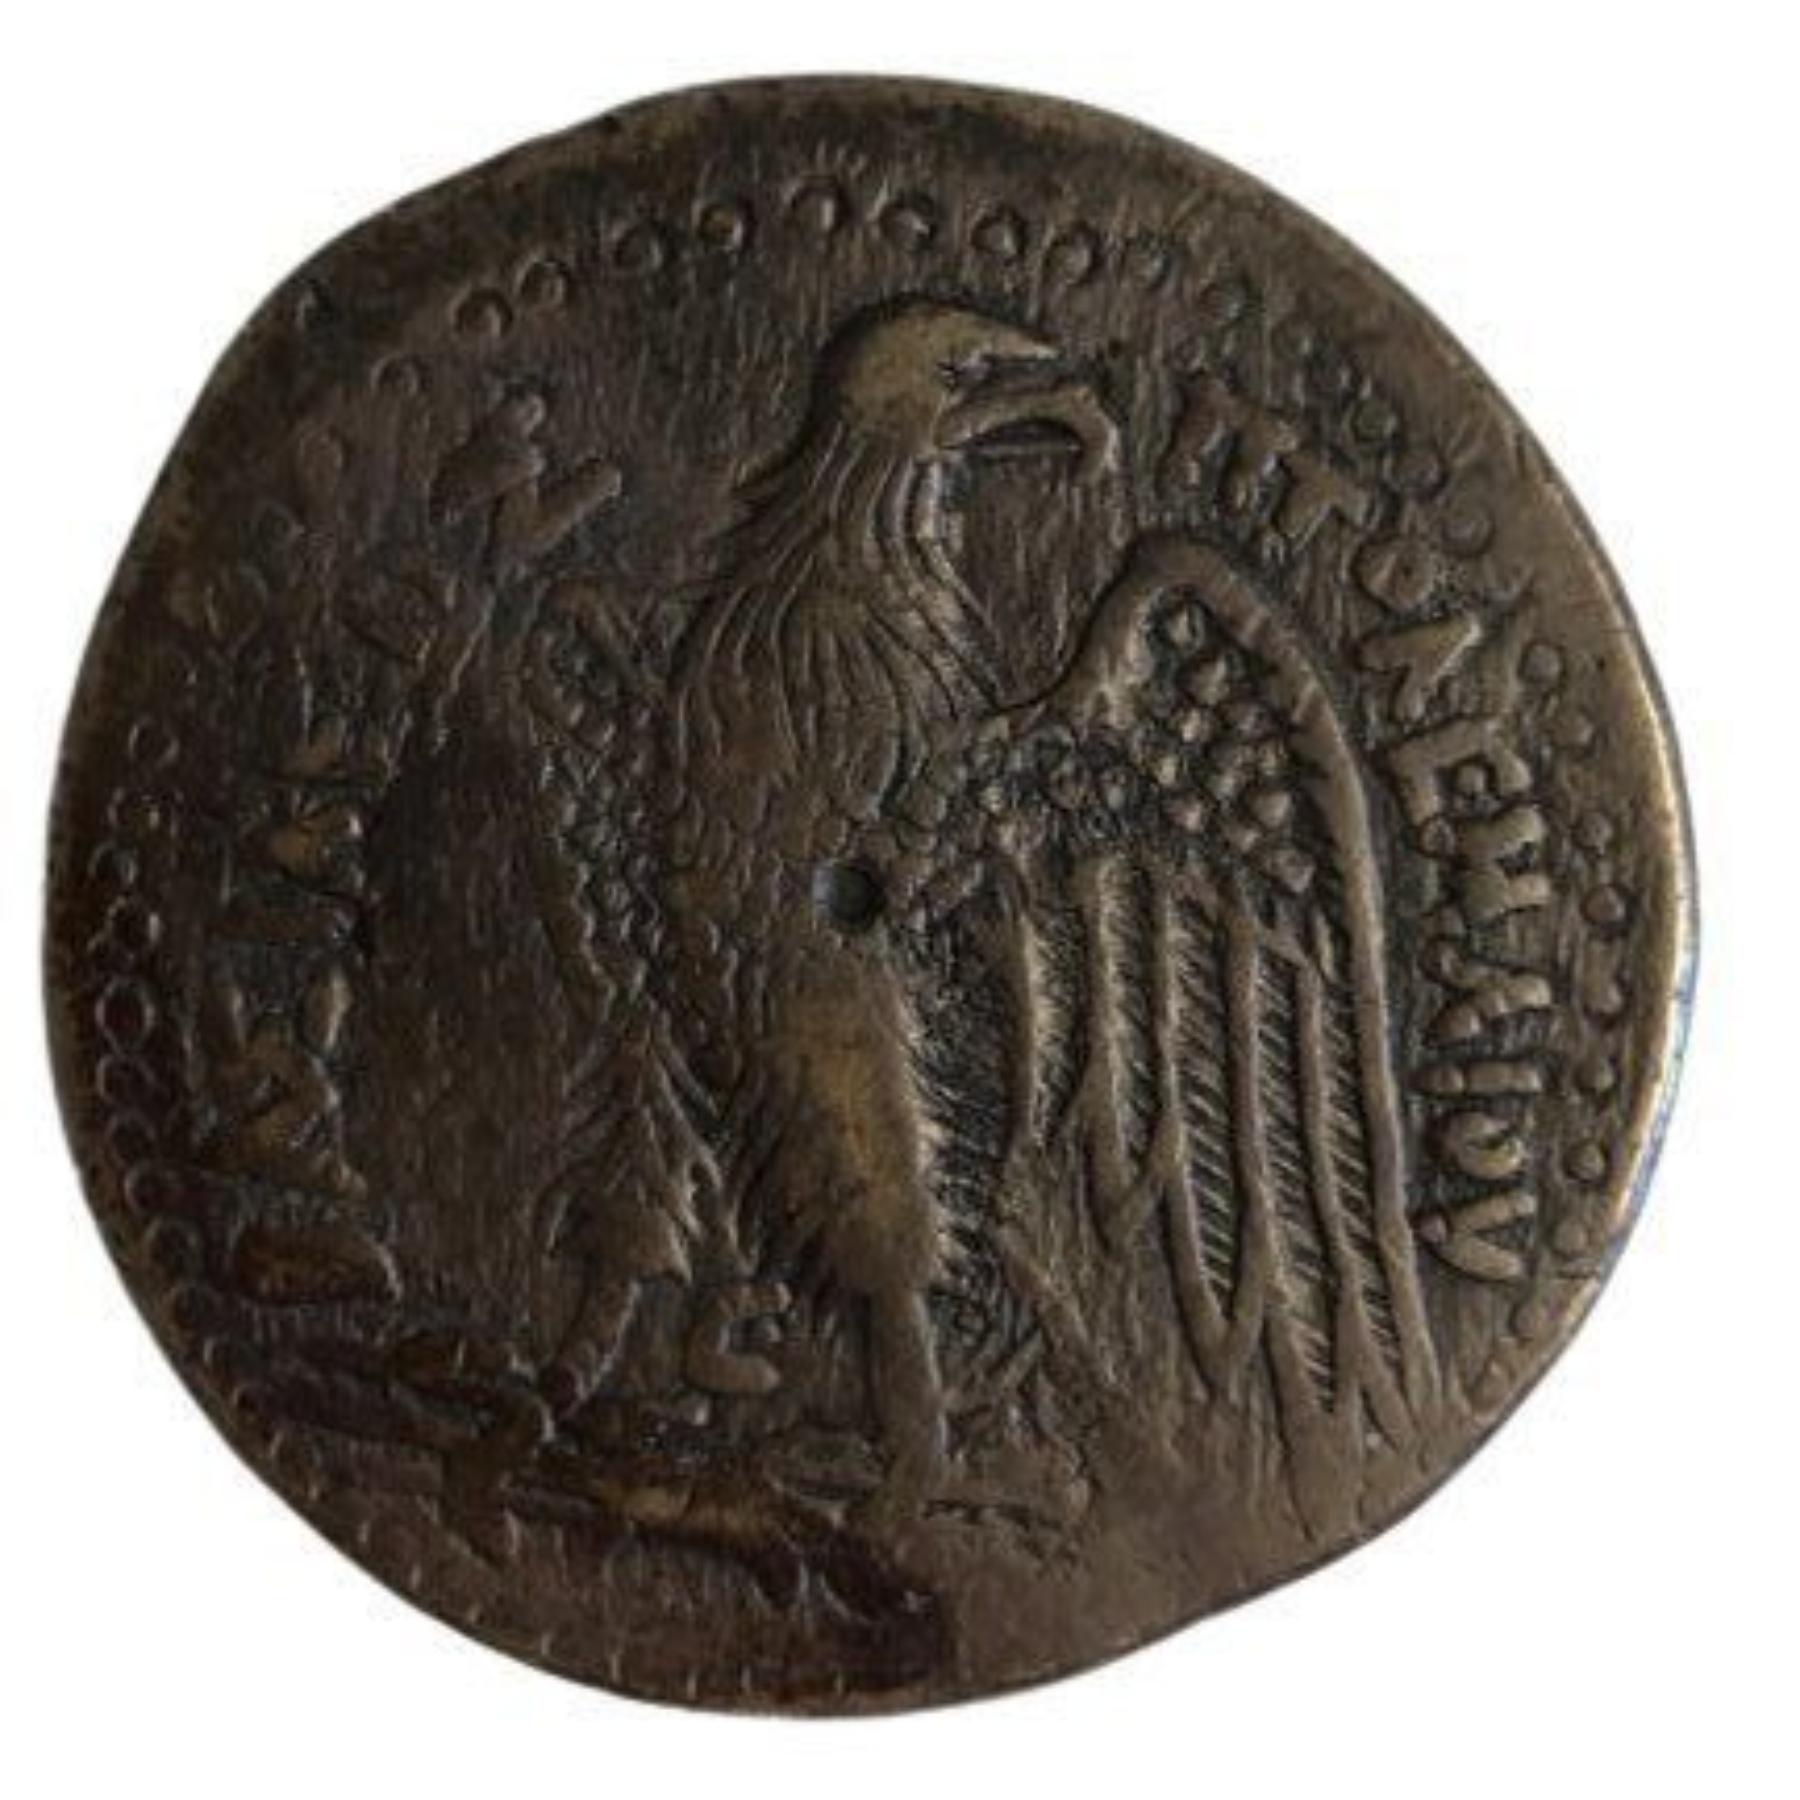 This is one of the largest ancient coins ever. Very rare and hard to find. It is in an excellent condition with a lot of details showing. The coin is about 44.5 millimeters wide and 94.5 grams in weight. Outstanding coin in terms of size that